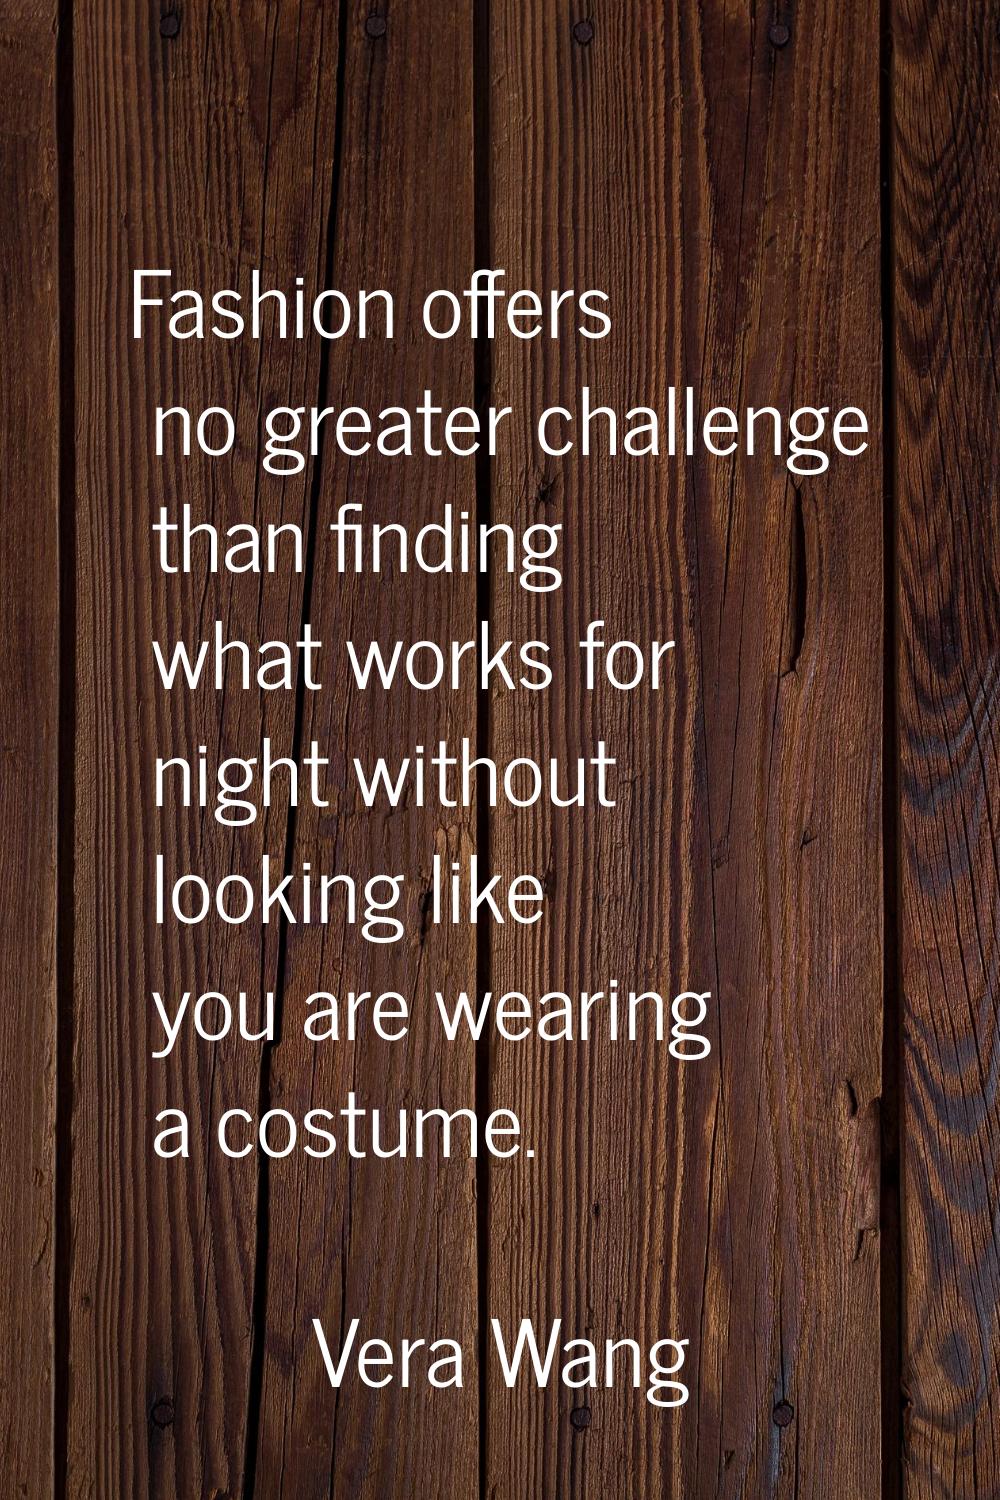 Fashion offers no greater challenge than finding what works for night without looking like you are 